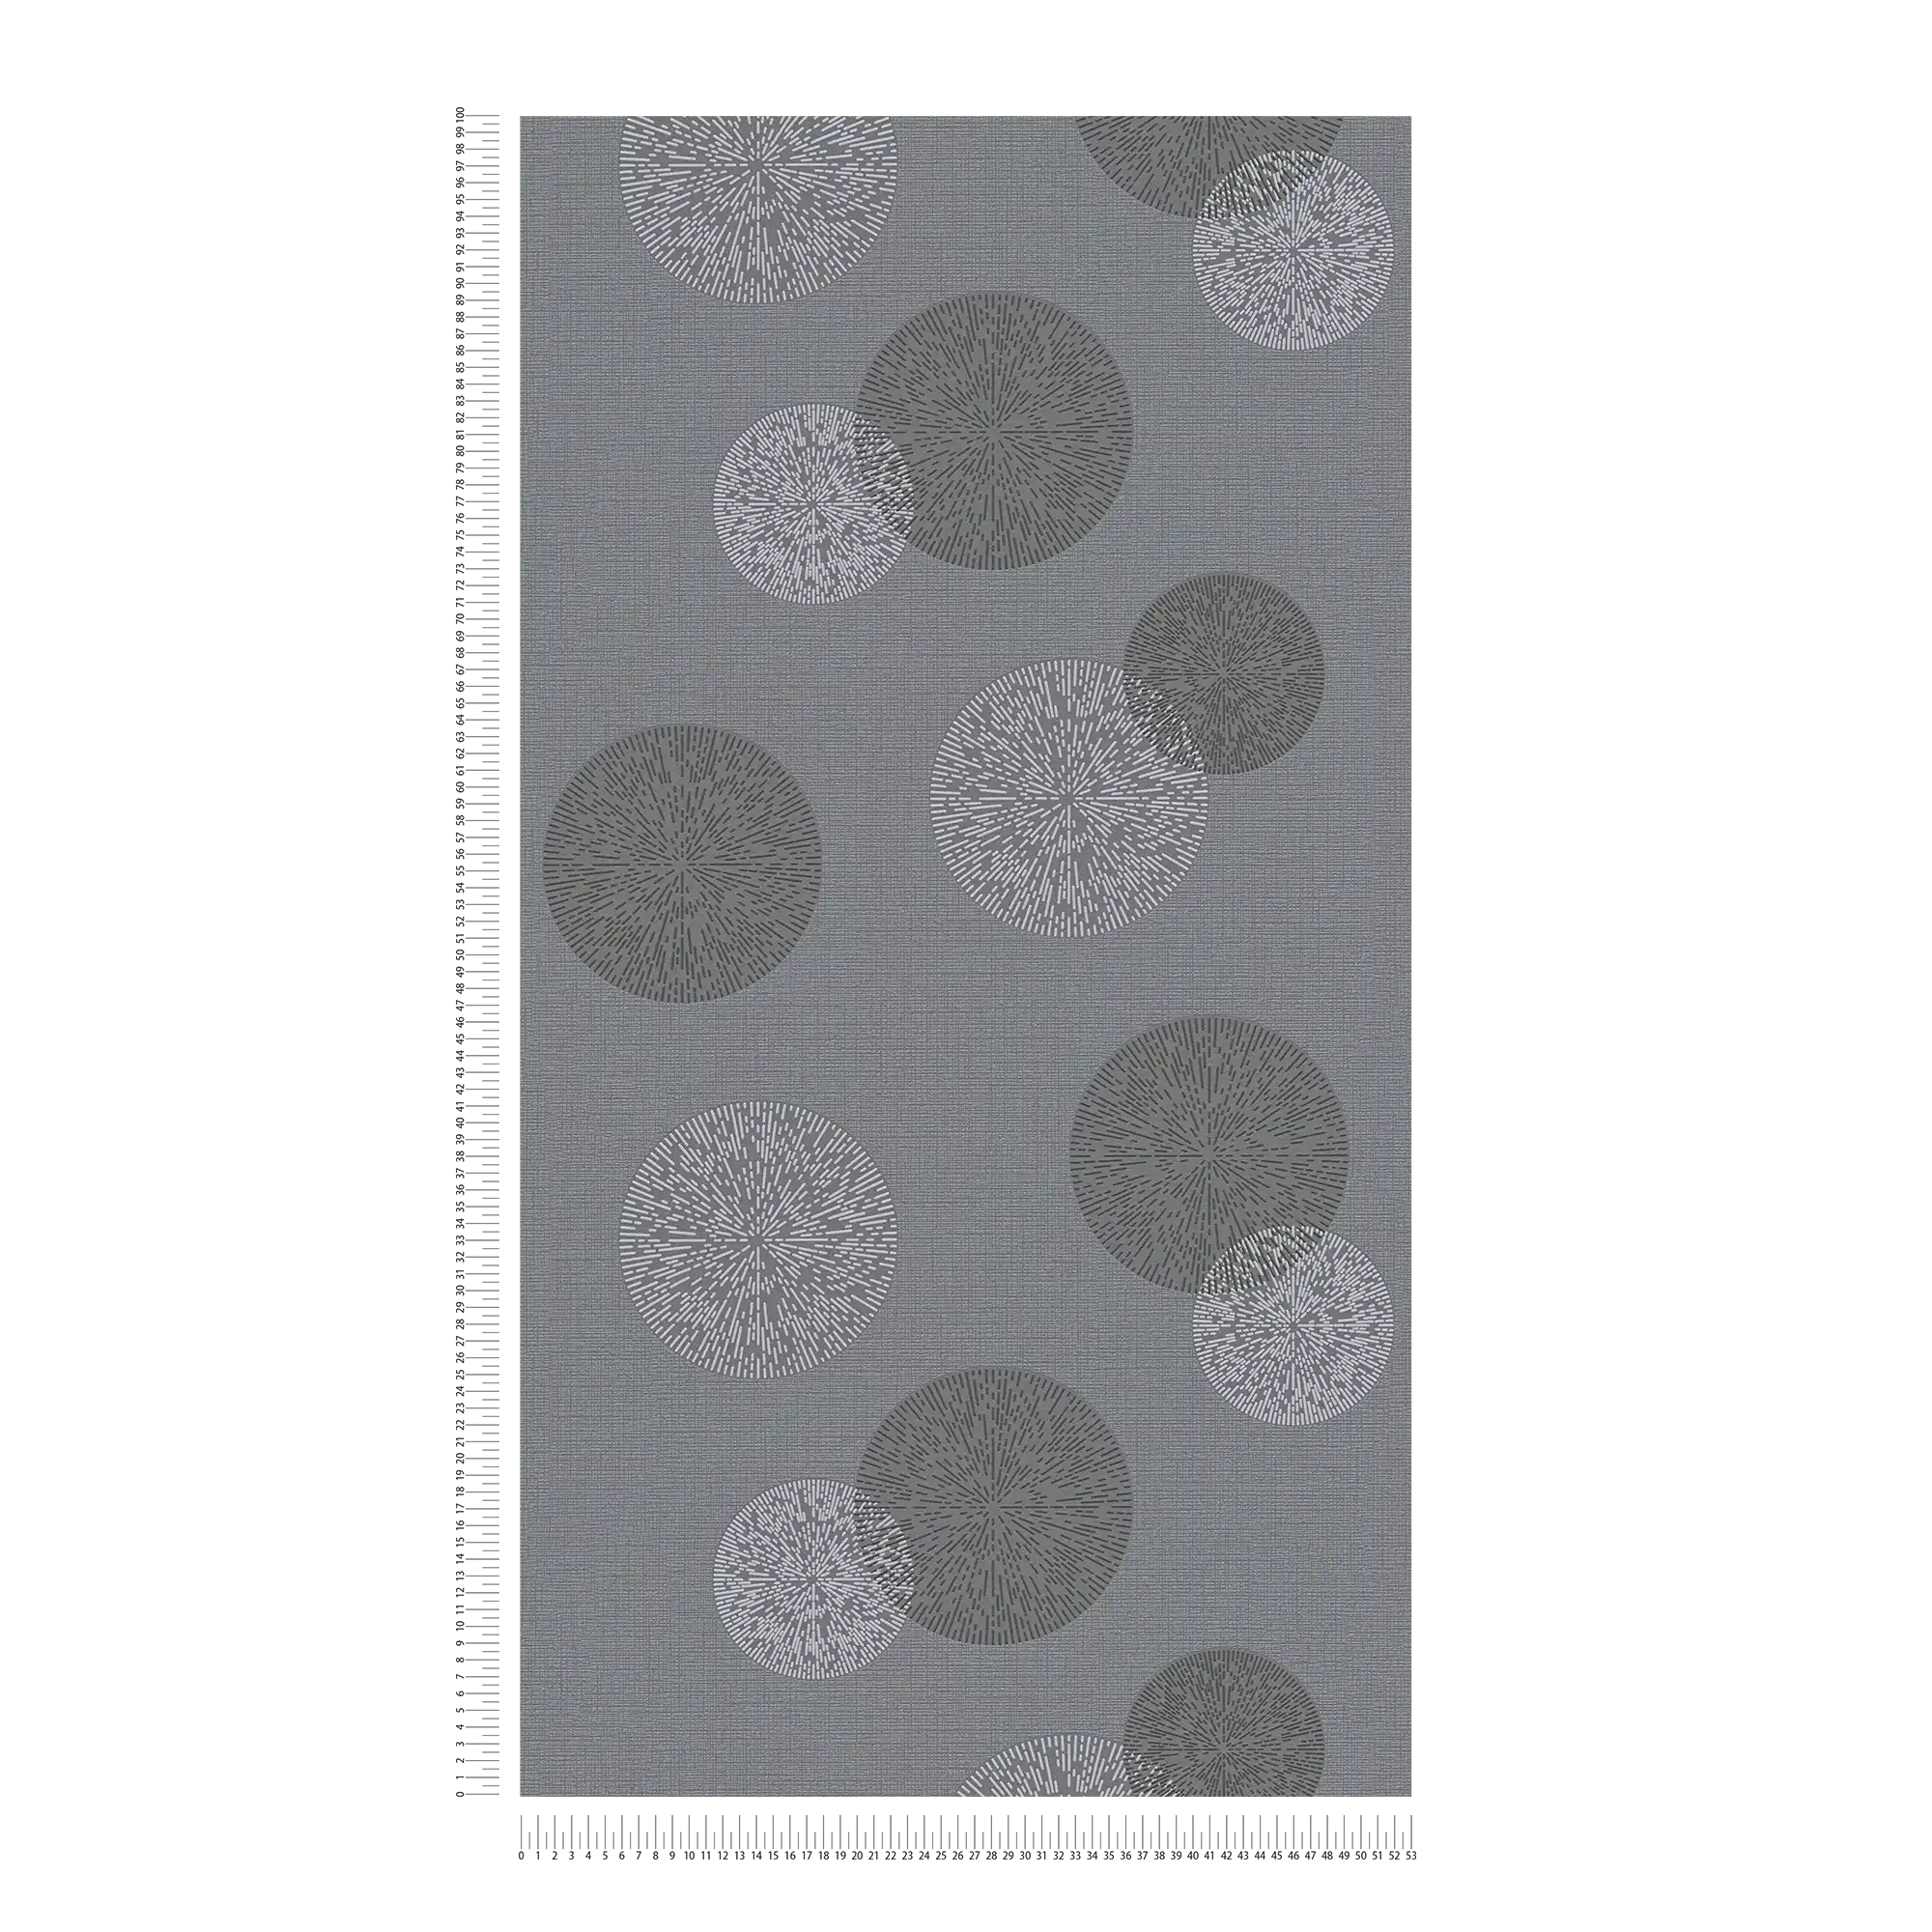             Living room wallpaper with modern circle pattern - grey
        